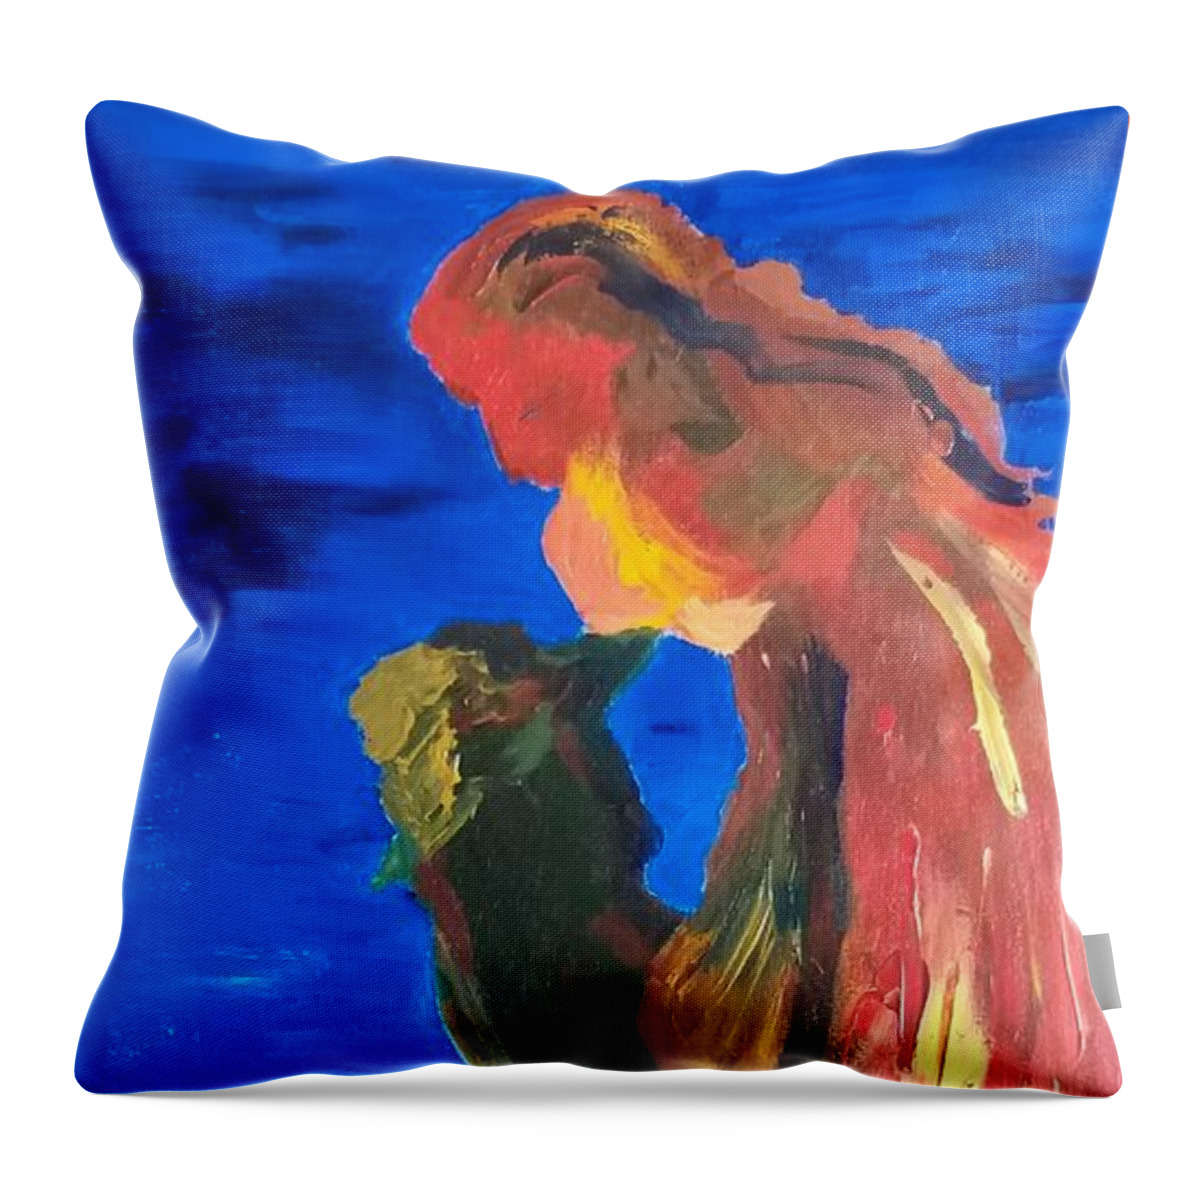 Melting Throw Pillow featuring the painting The Melting by Geeta Yerra